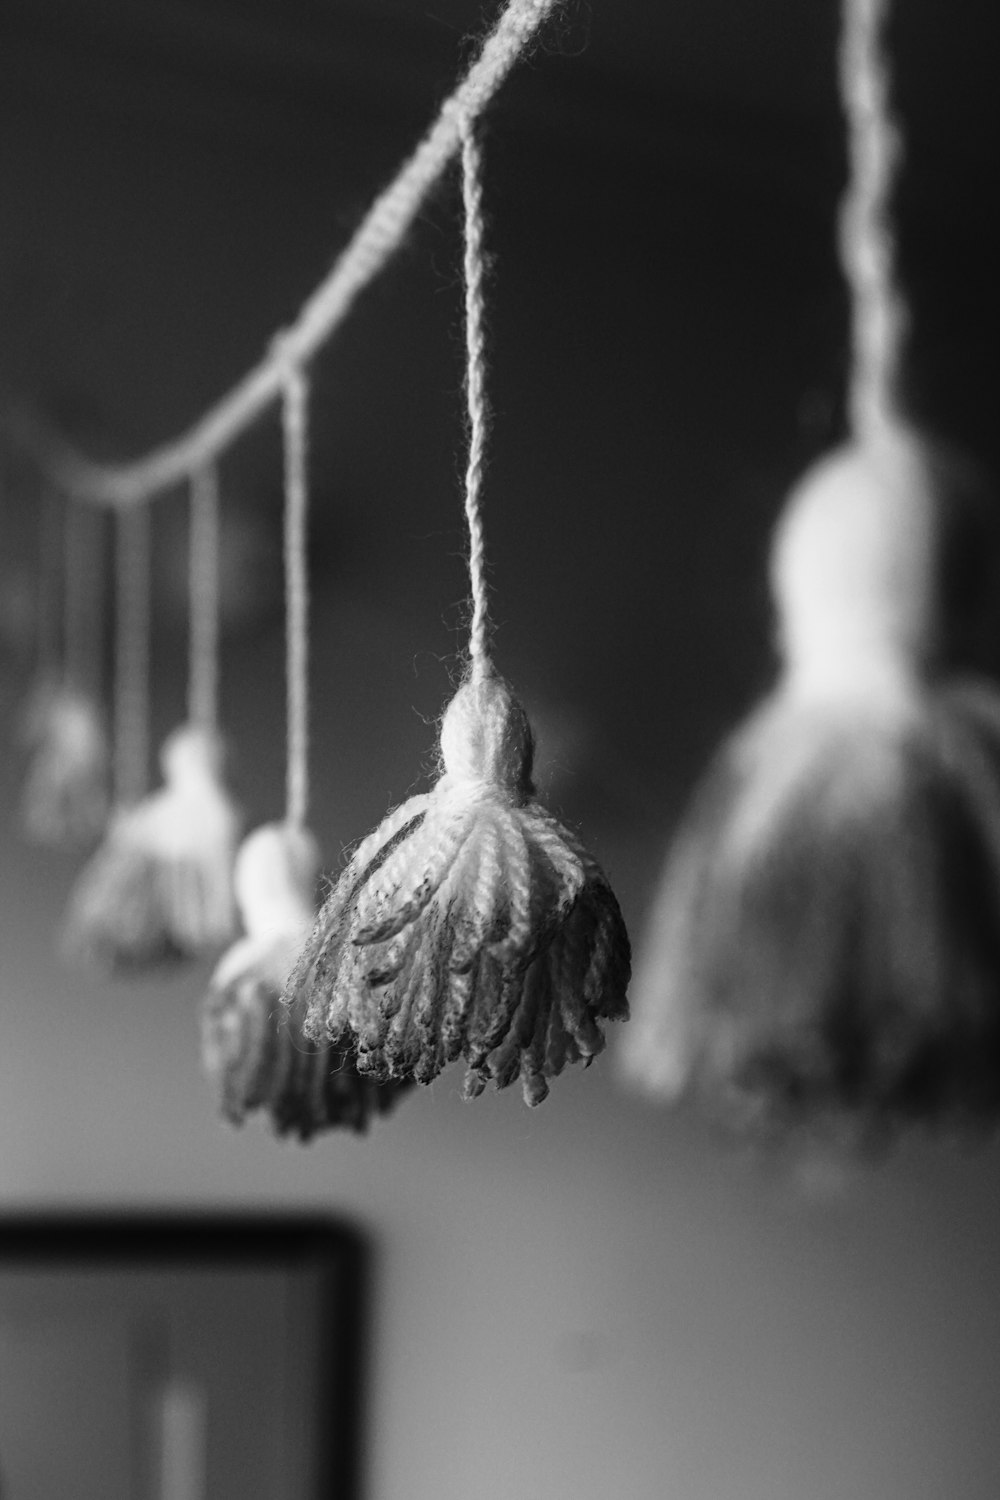 a black and white photo of some tassels hanging from a rope